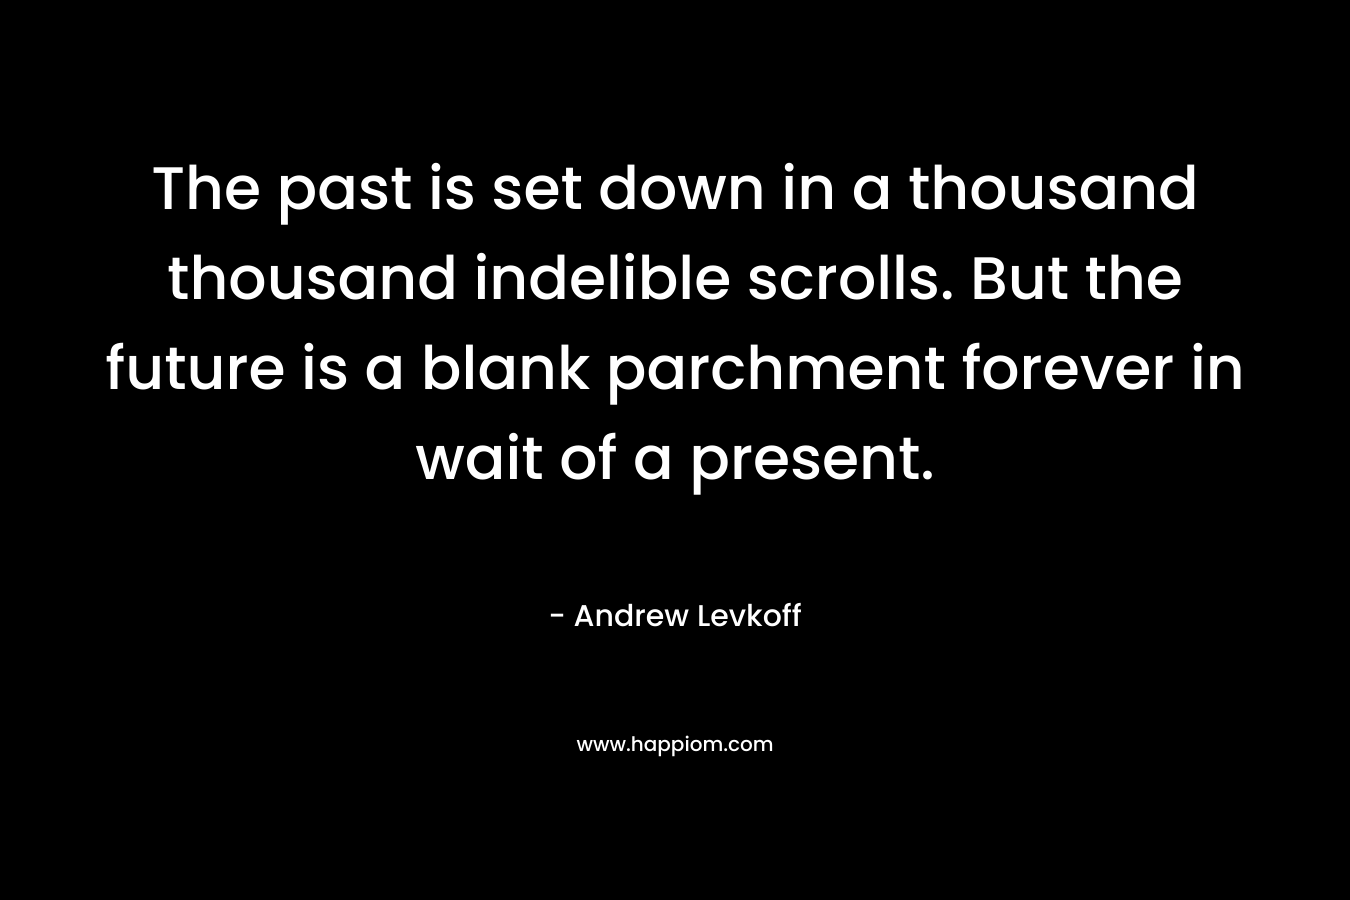 The past is set down in a thousand thousand indelible scrolls. But the future is a blank parchment forever in wait of a present.